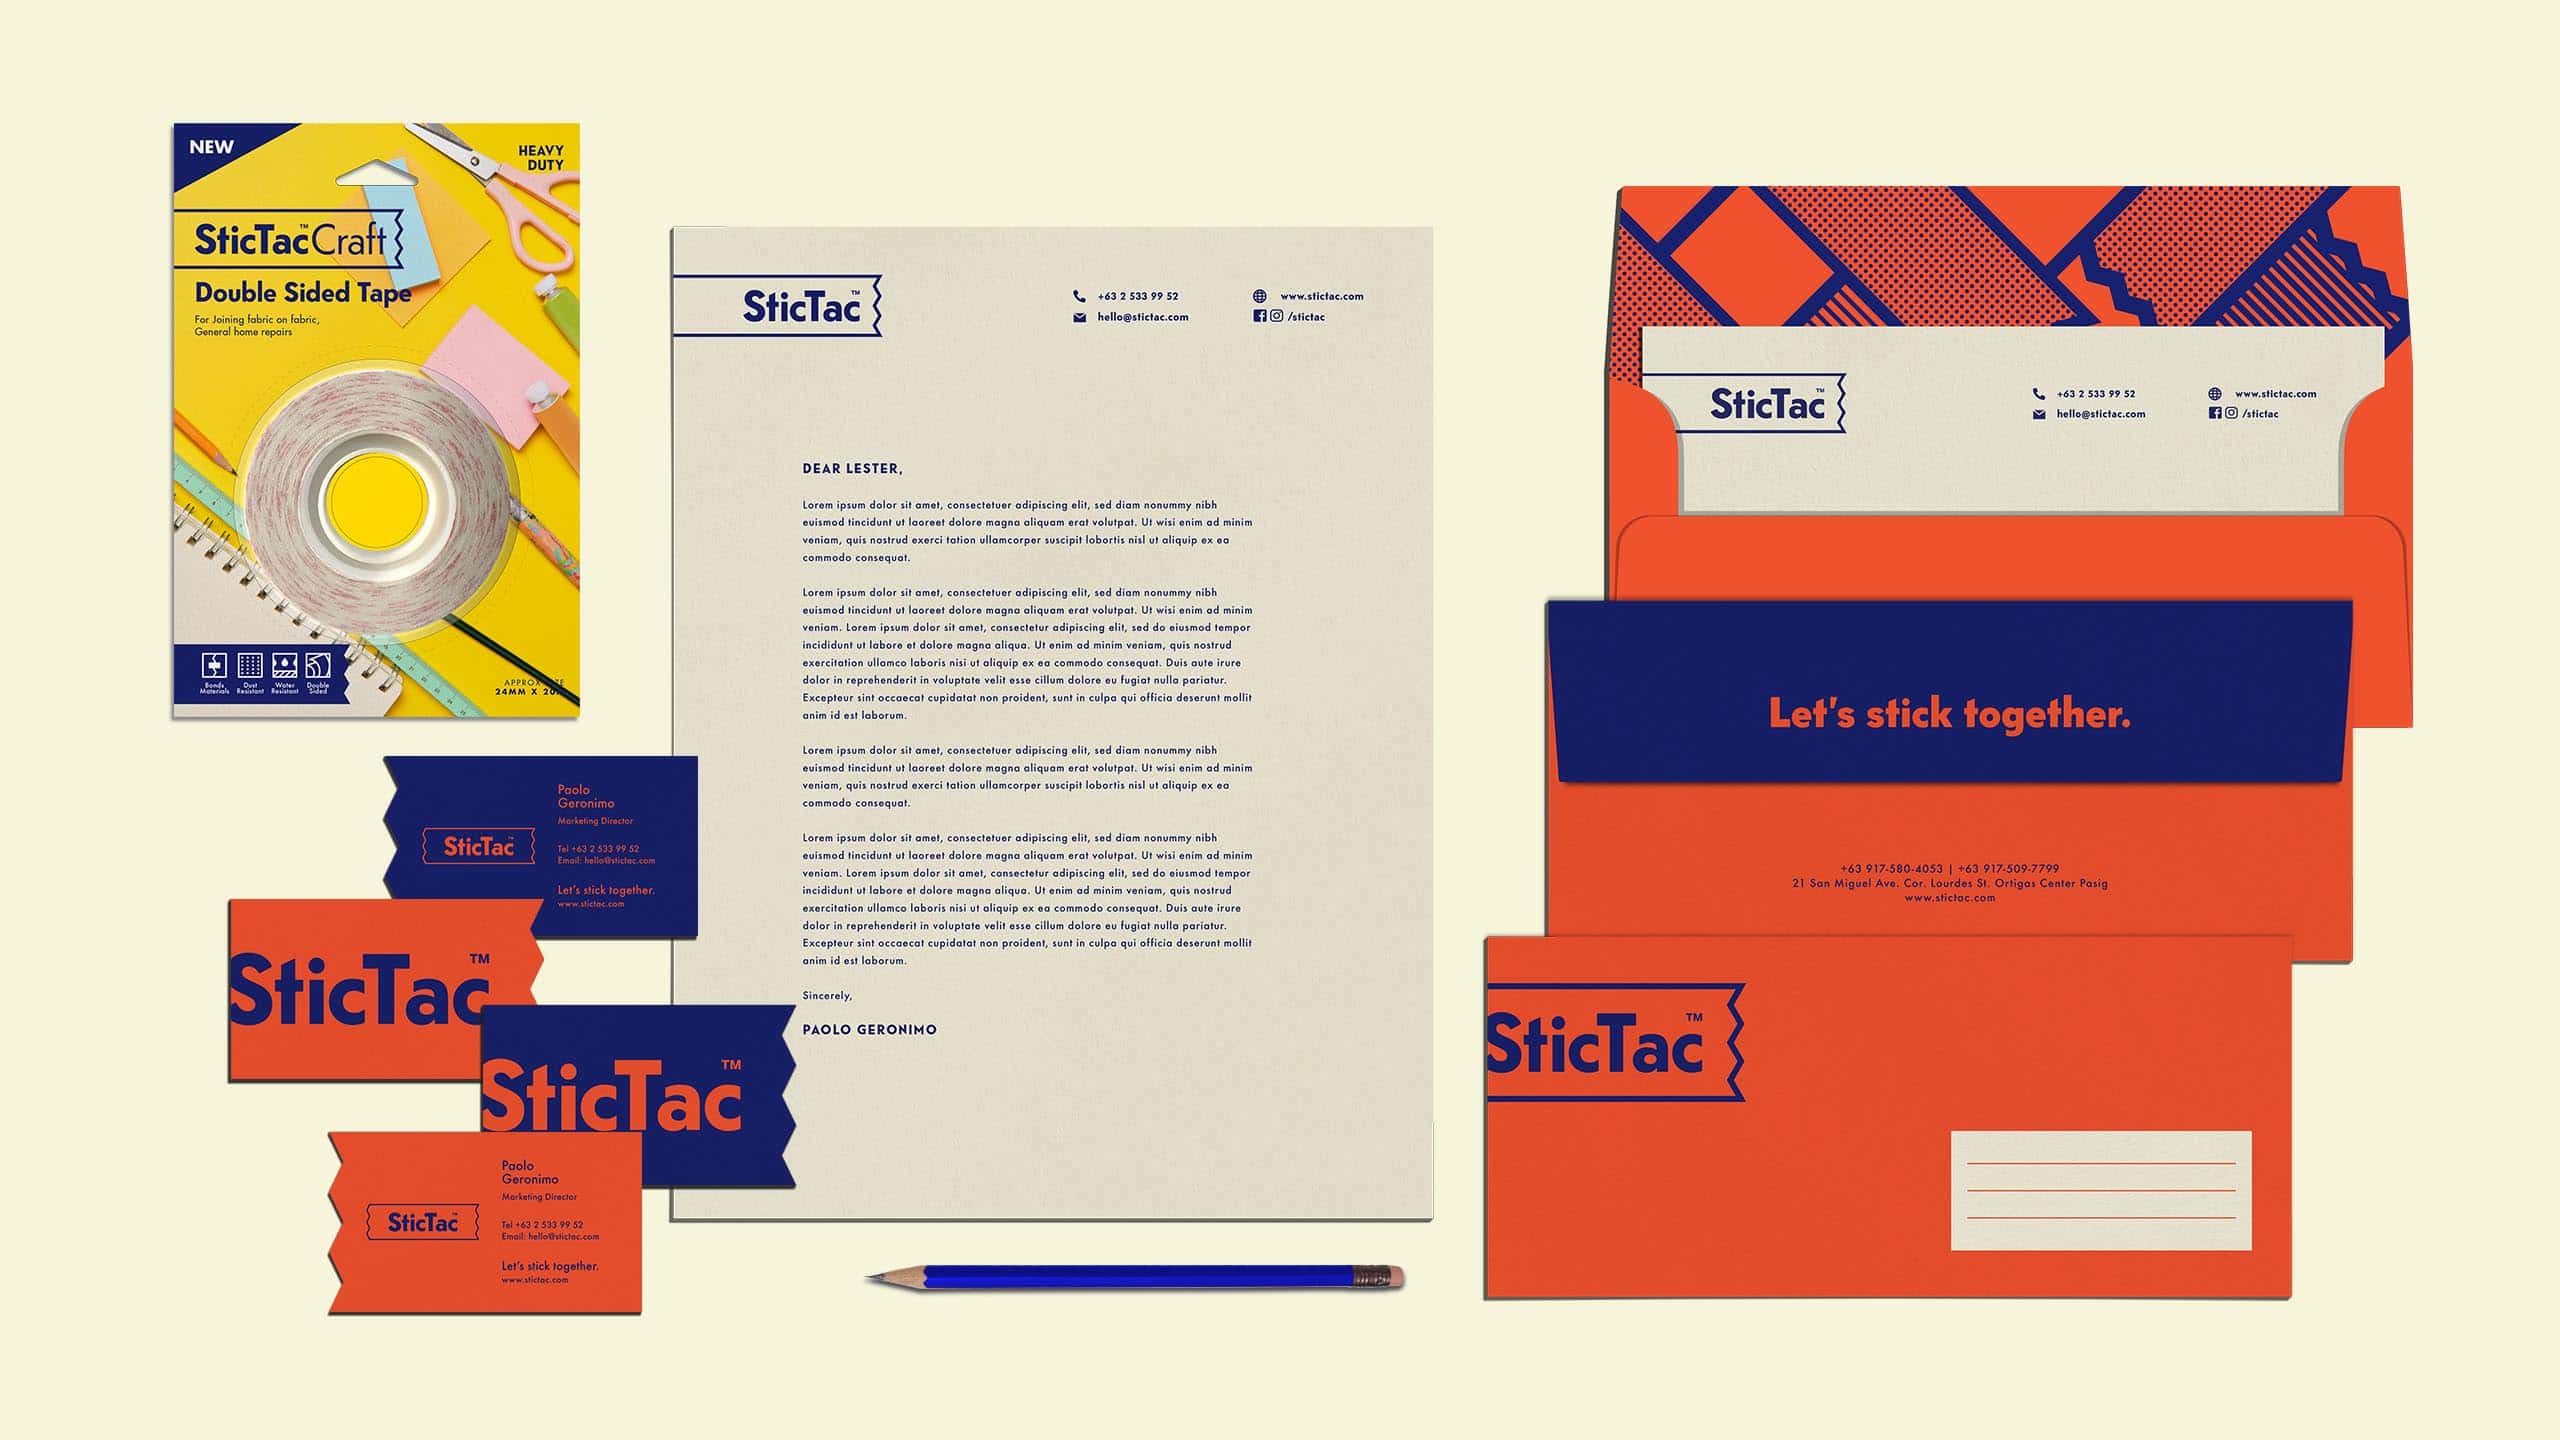 Branded stationary and packaging for tools and supplies brand SticTac